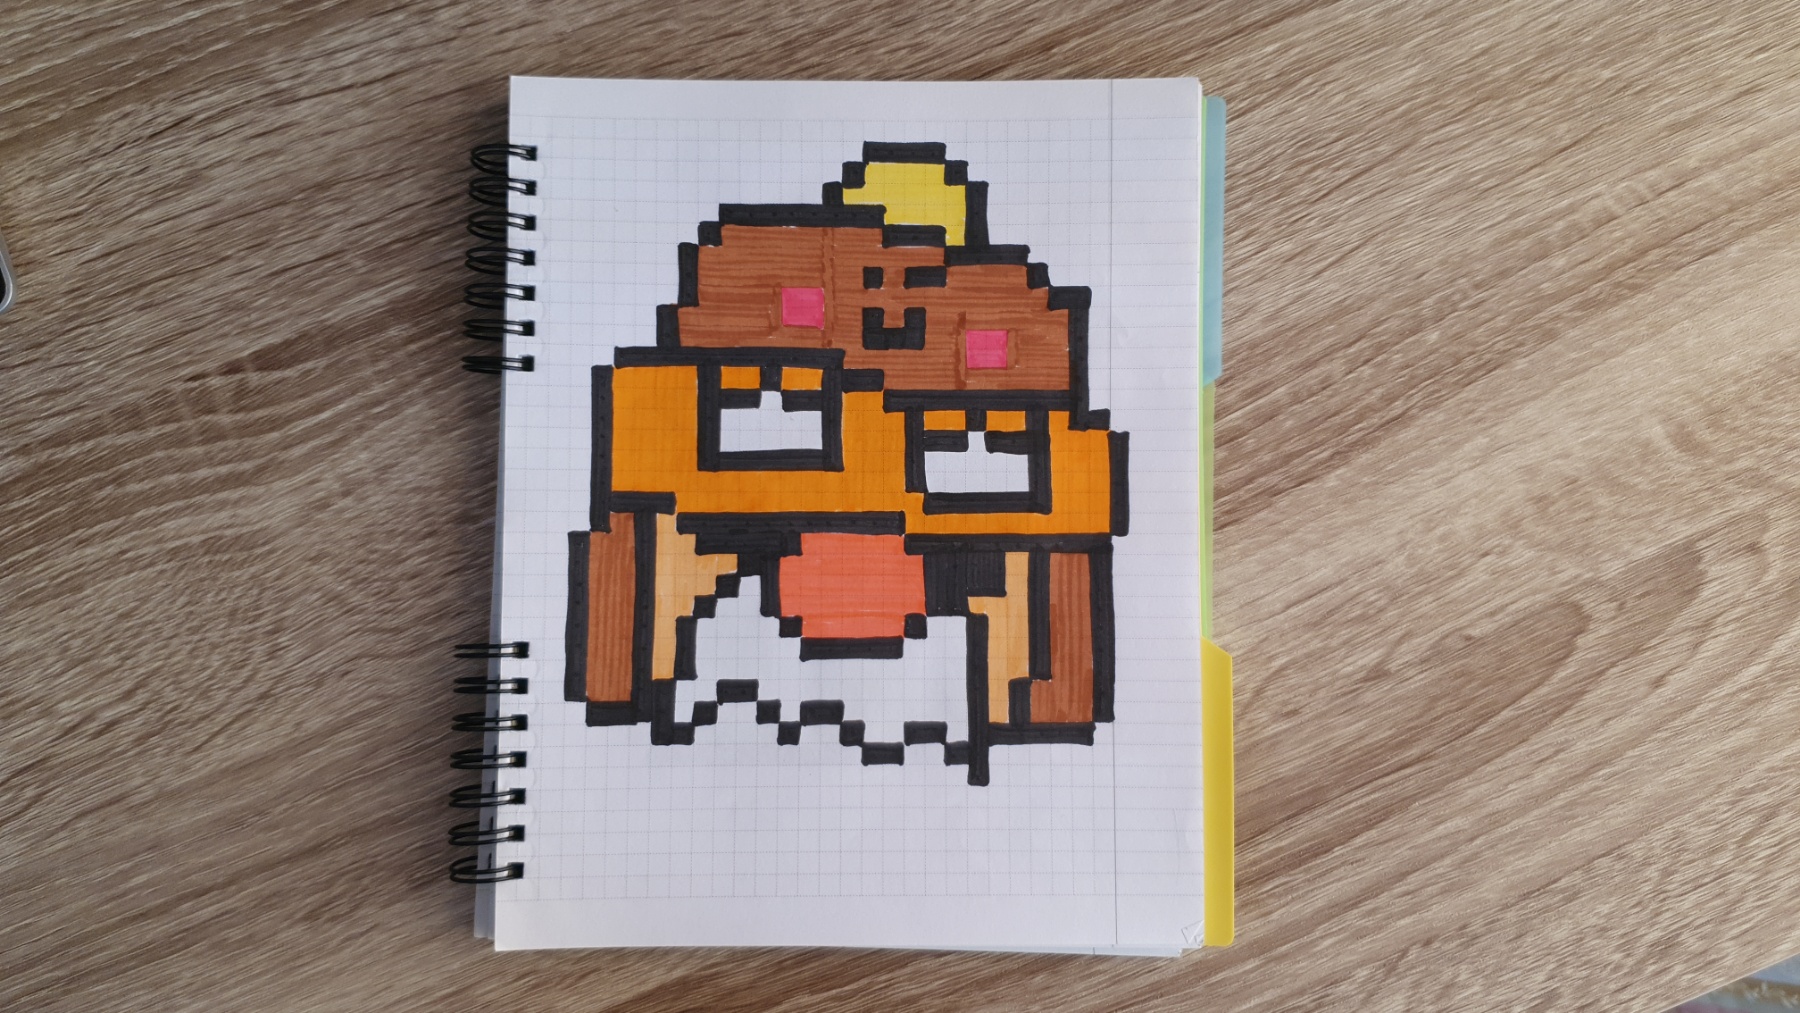 Trader Gale From Brawl Stars Pixel Art Baby Sos - brawl stars pixel art pixel